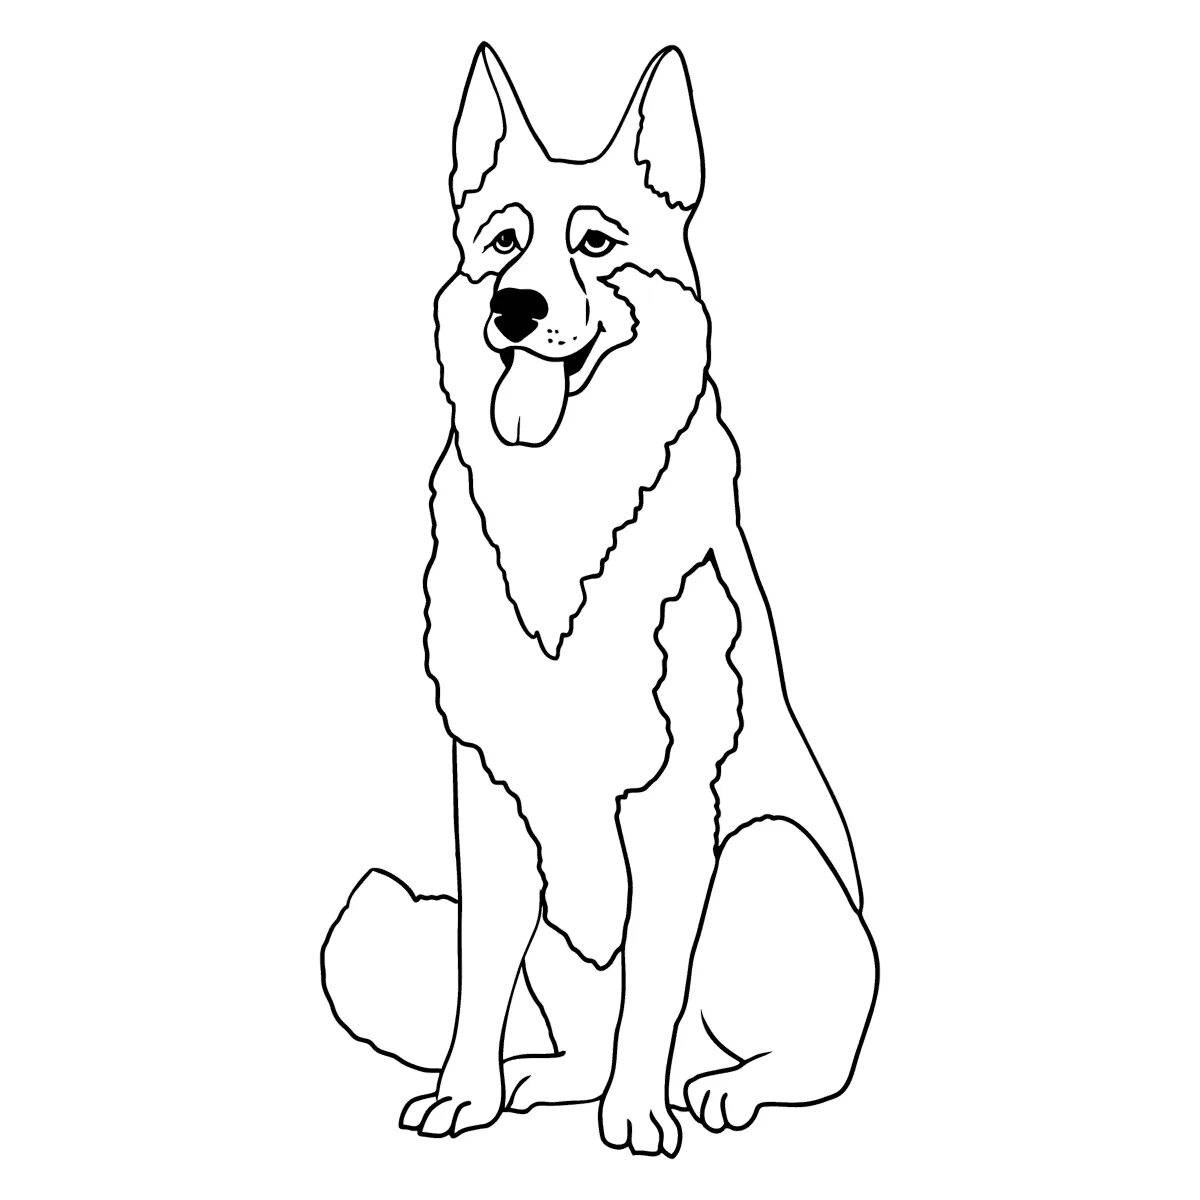 Coloring book witty shepherd dog for kids